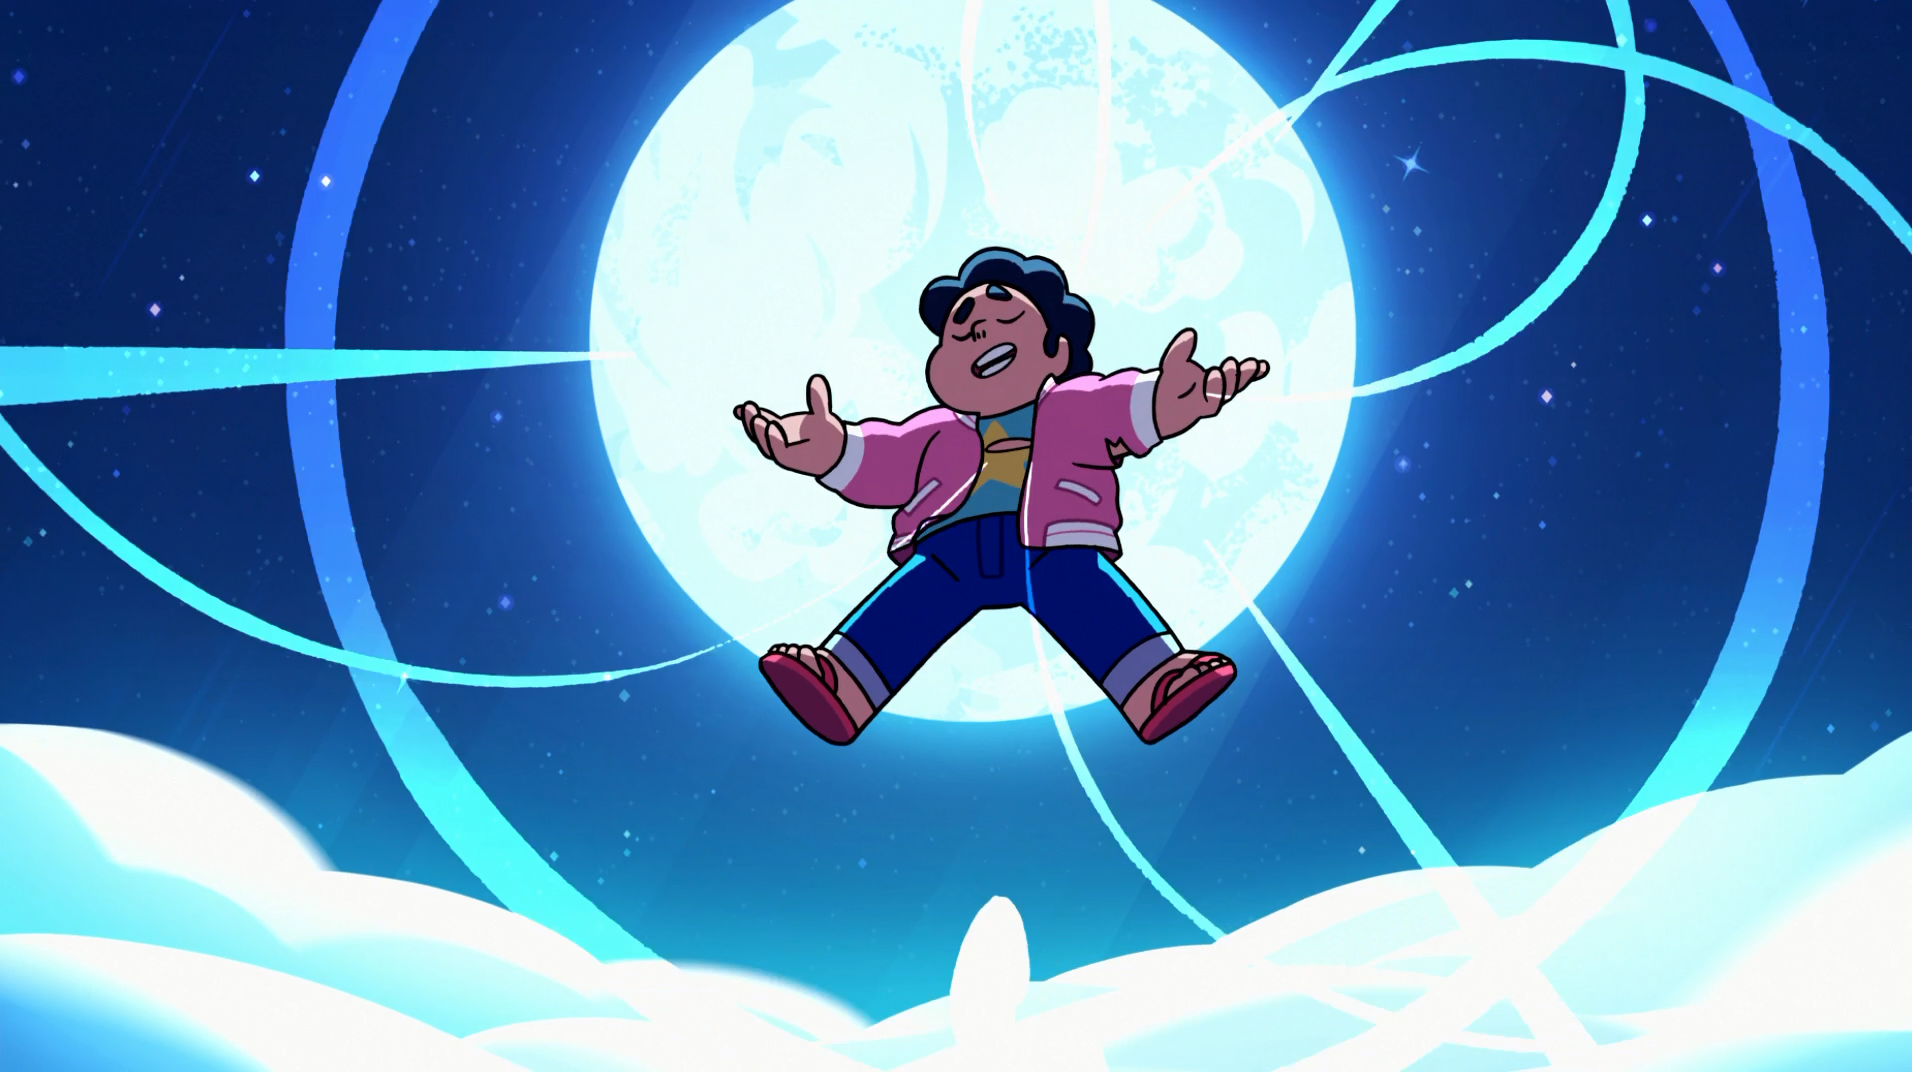 Steven Universe is a coming-of-age story told from the perspective of Steve...